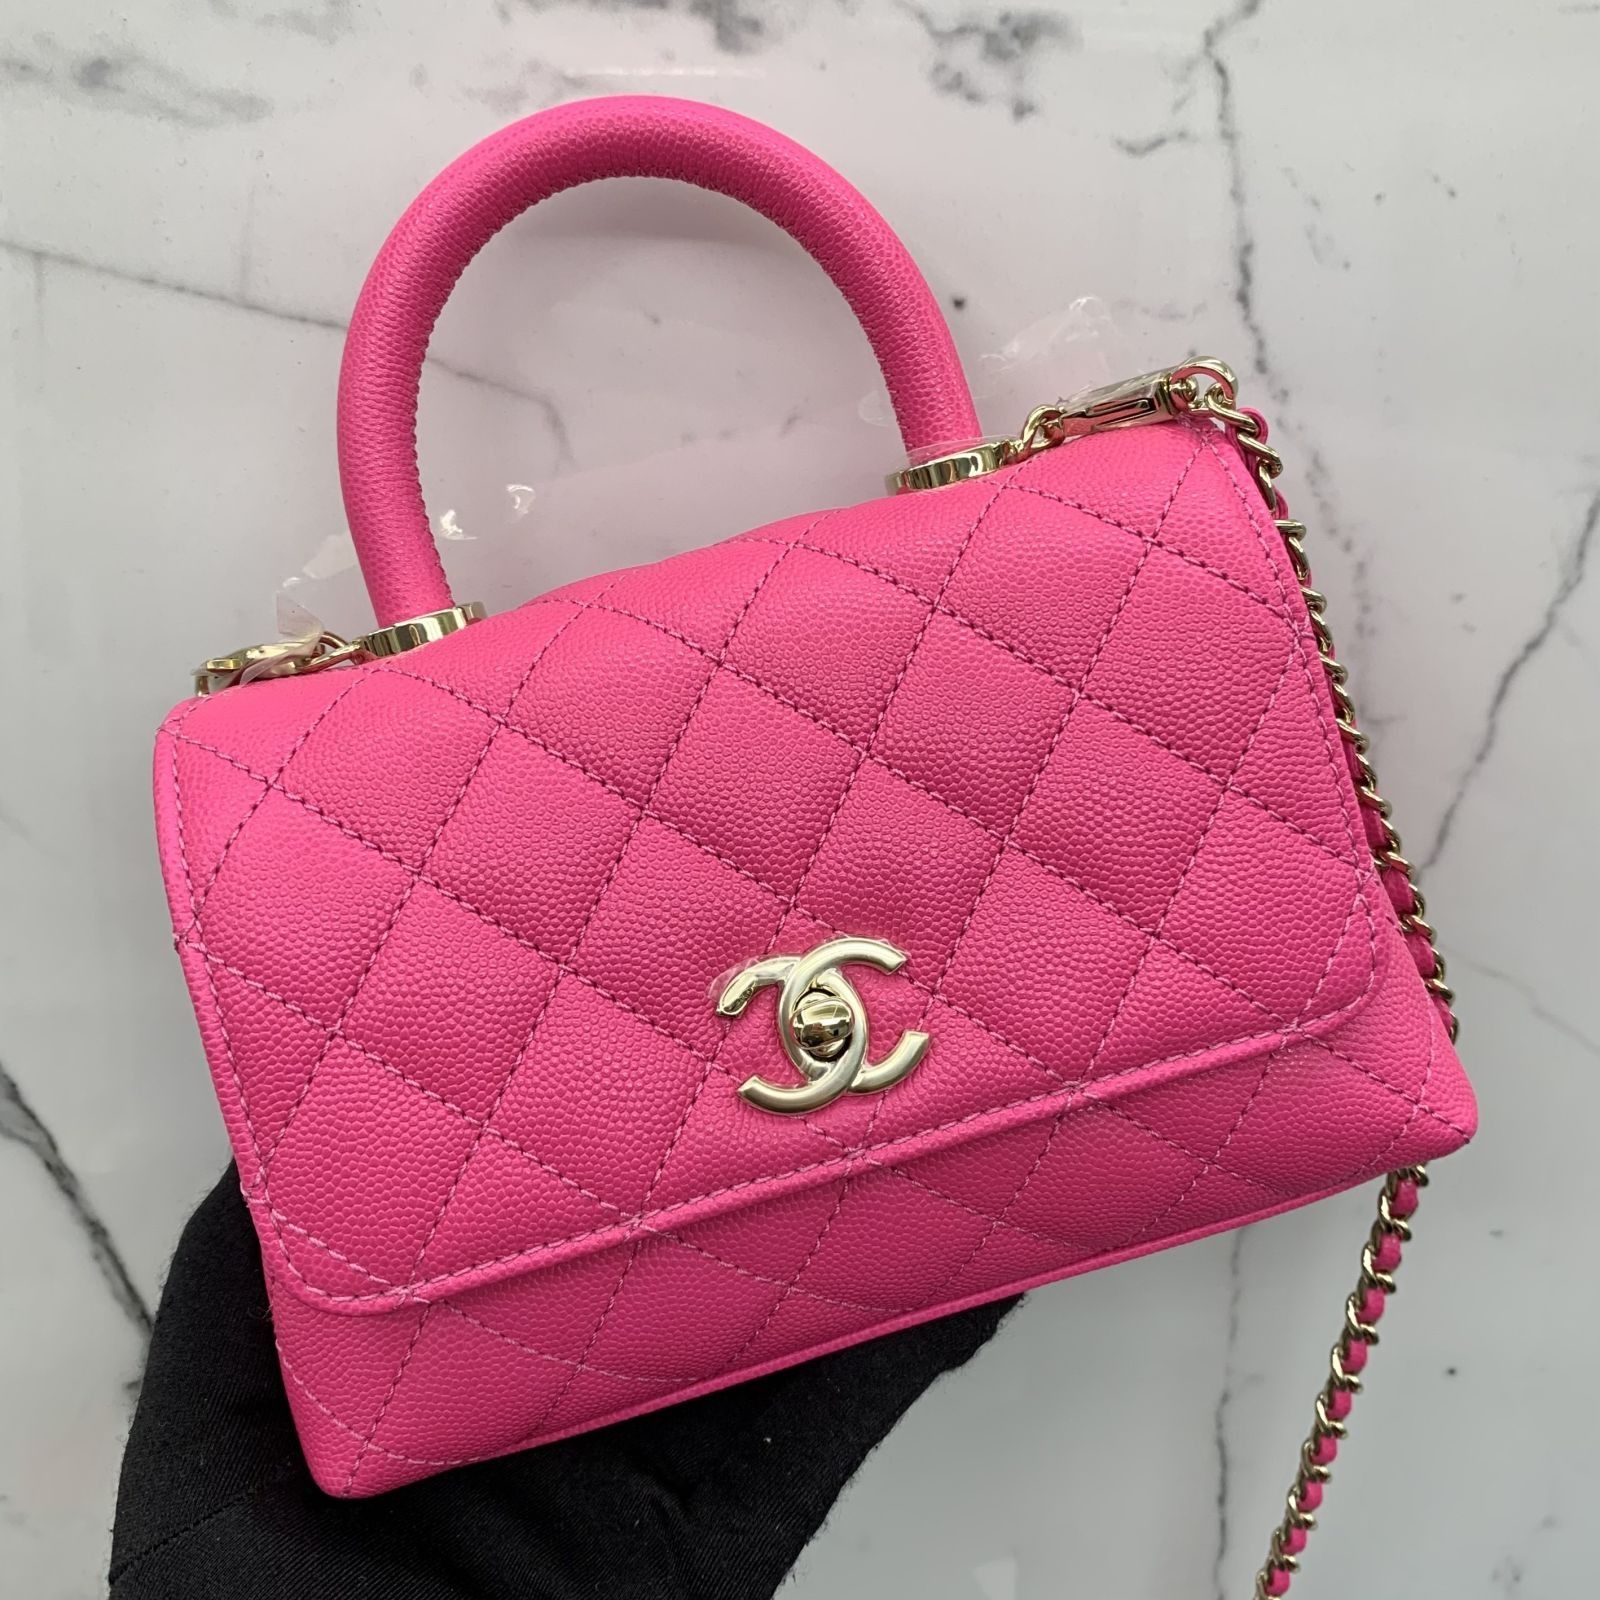 CHANEL CHANEL Matelasse Coco Handle Chain Shoulder Bag A92990 Caviar  leather Pink Used A92990